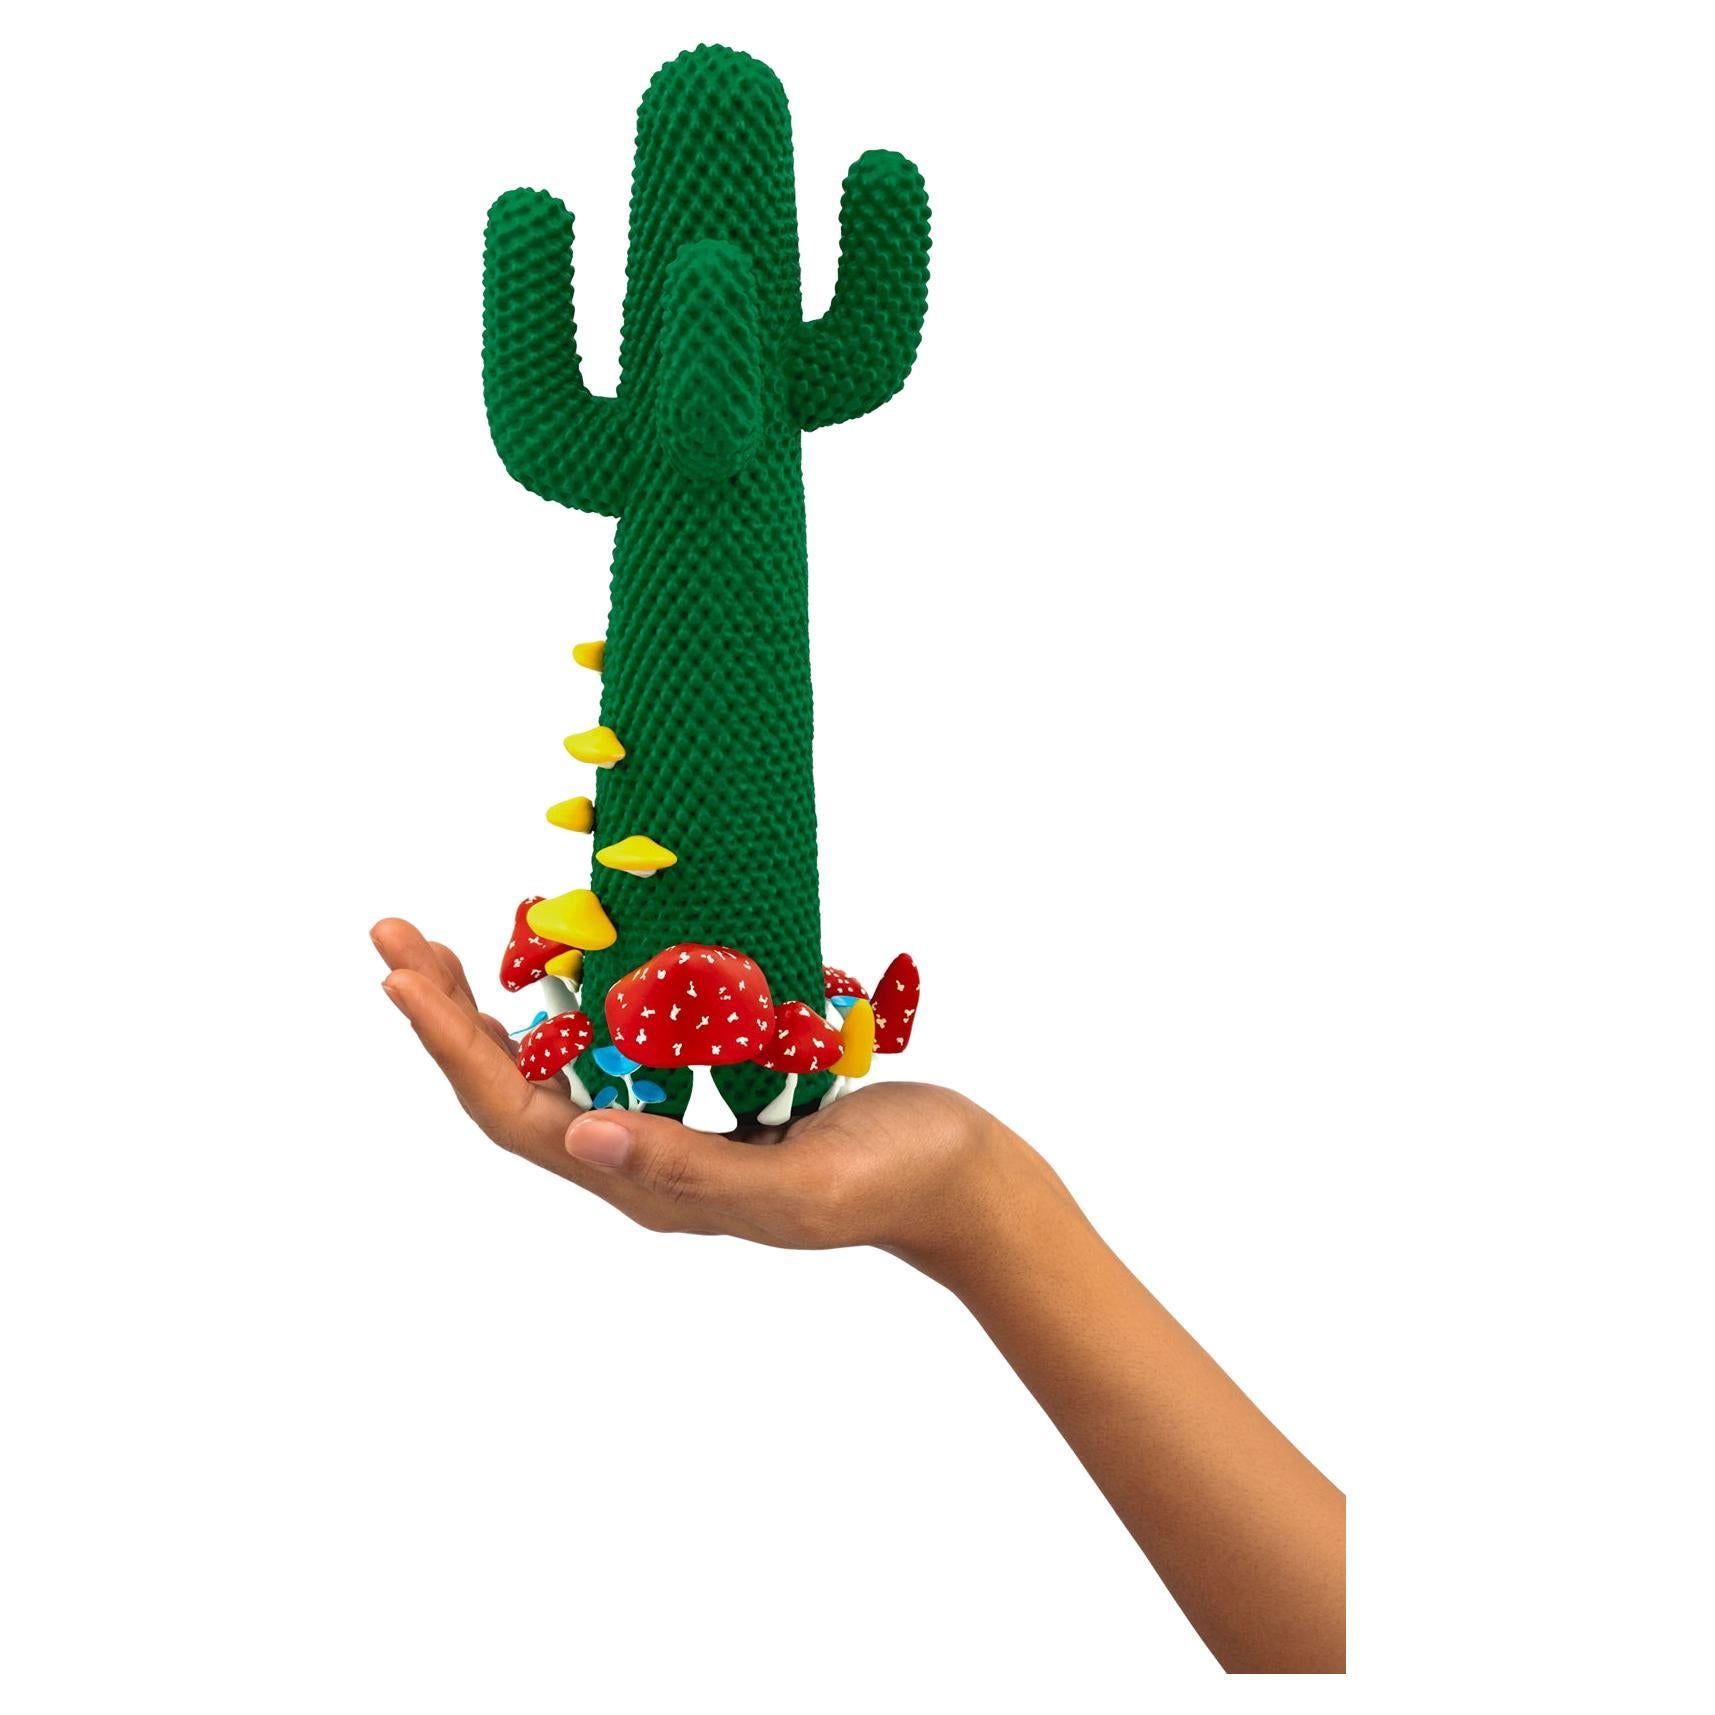 LIMITED EDITION #24/99

Gufram presents the miniaturised version of the Shroom CACTUS® created in collaboration with A$AP Rocky and the artist’s new design studio HOMMEMADE Exactly as the real-size Shroom CACTUS®, the new Guframini piece features